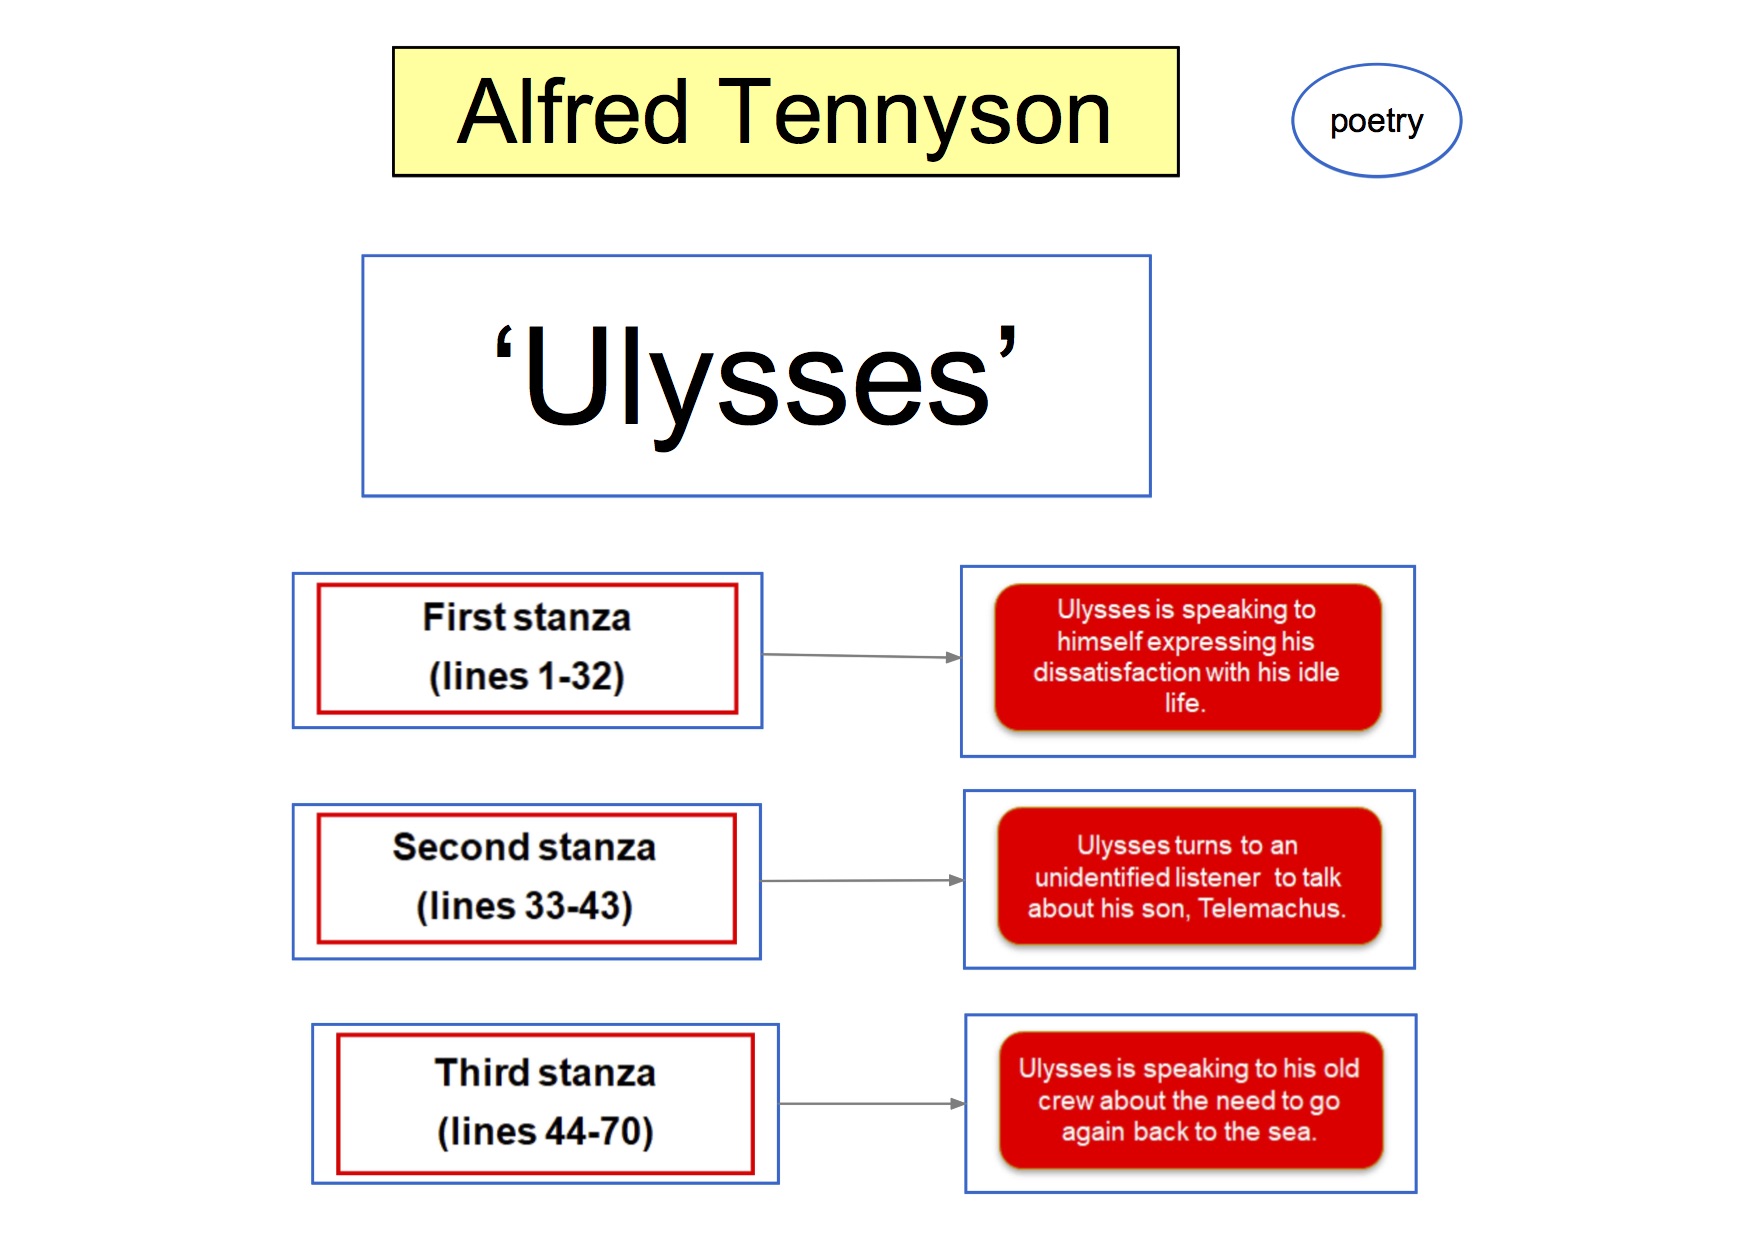 mappa concettuale visual map Inglese  Alfred Tennyson poetry ulysses 1-2-3 stanza